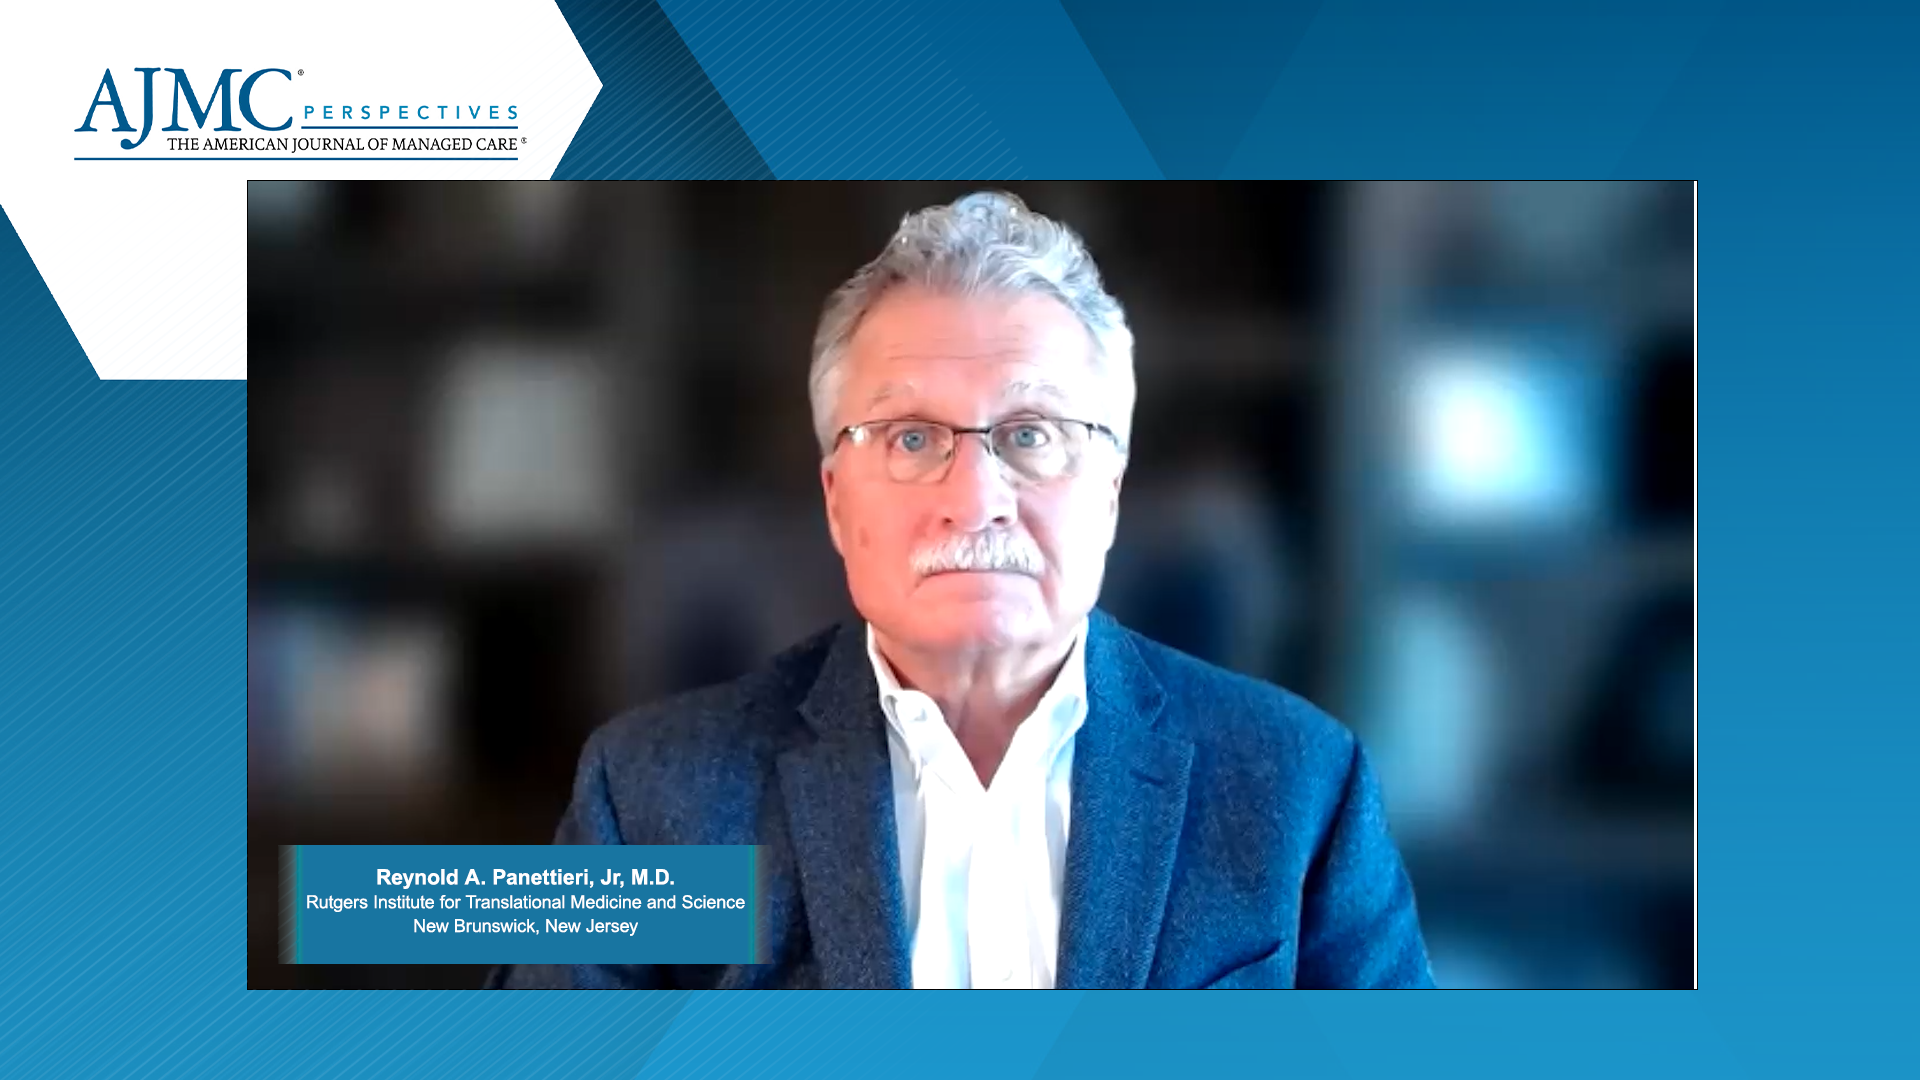 Interview with Reynold A. Panettieri Jr, MD: Incorporating Key Updates From GOLD Into the Clinical Management of COPD